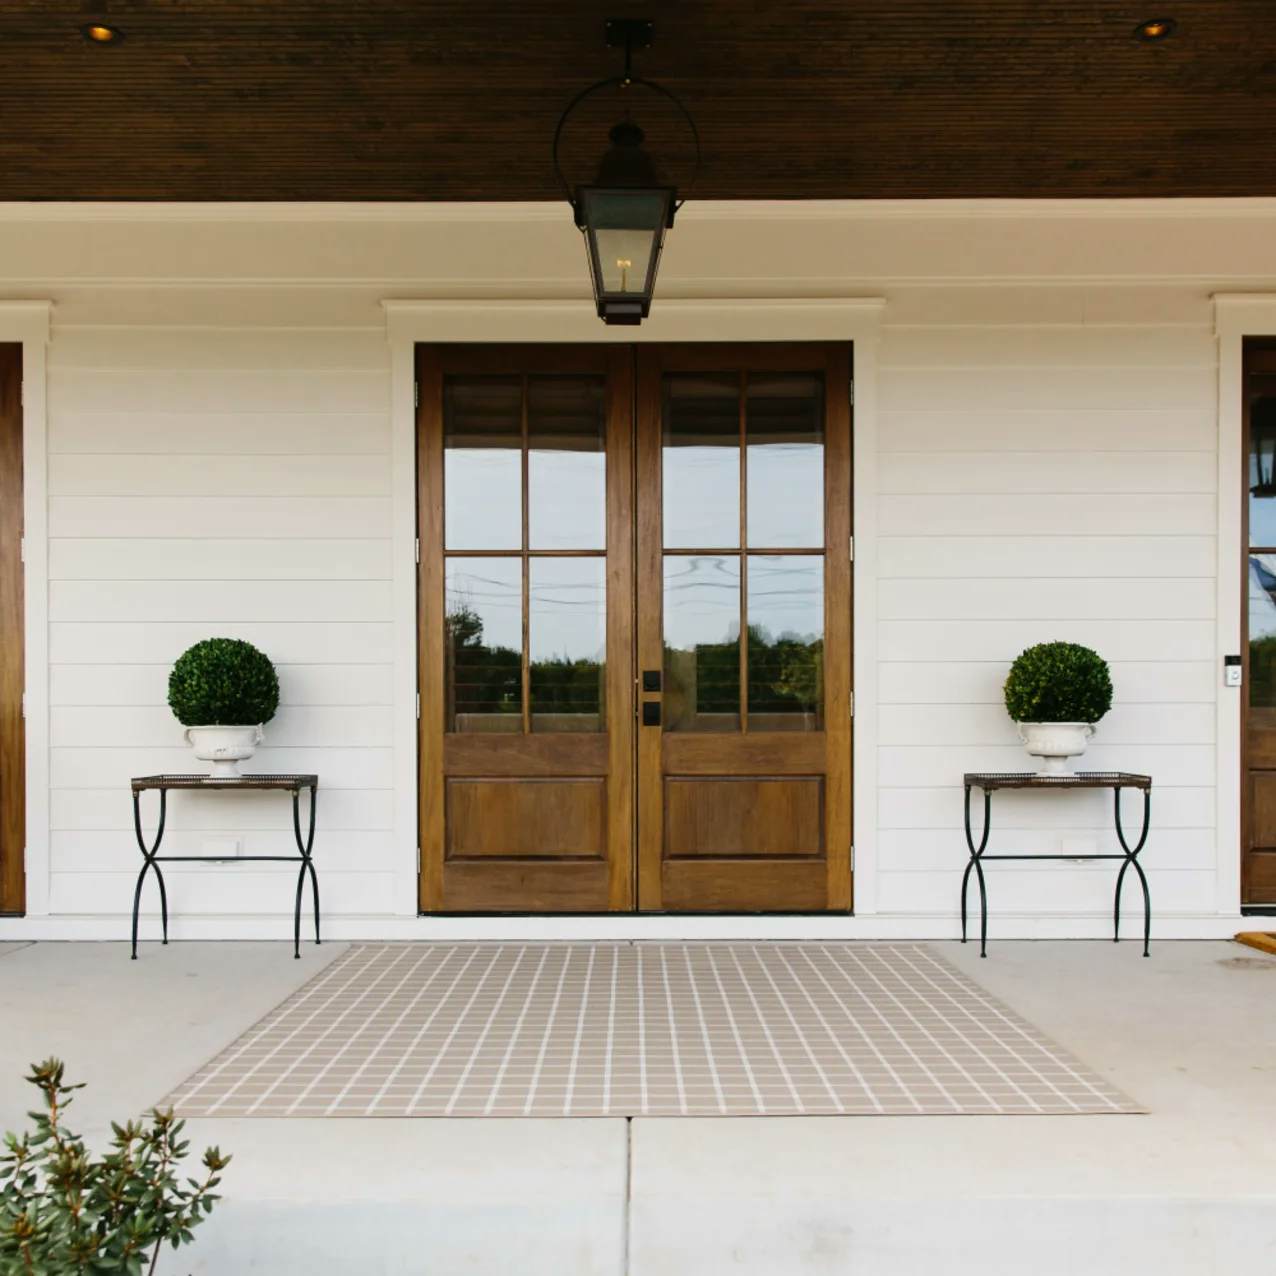 Sandpoint Beige Plaid outdoor area rug on front porch